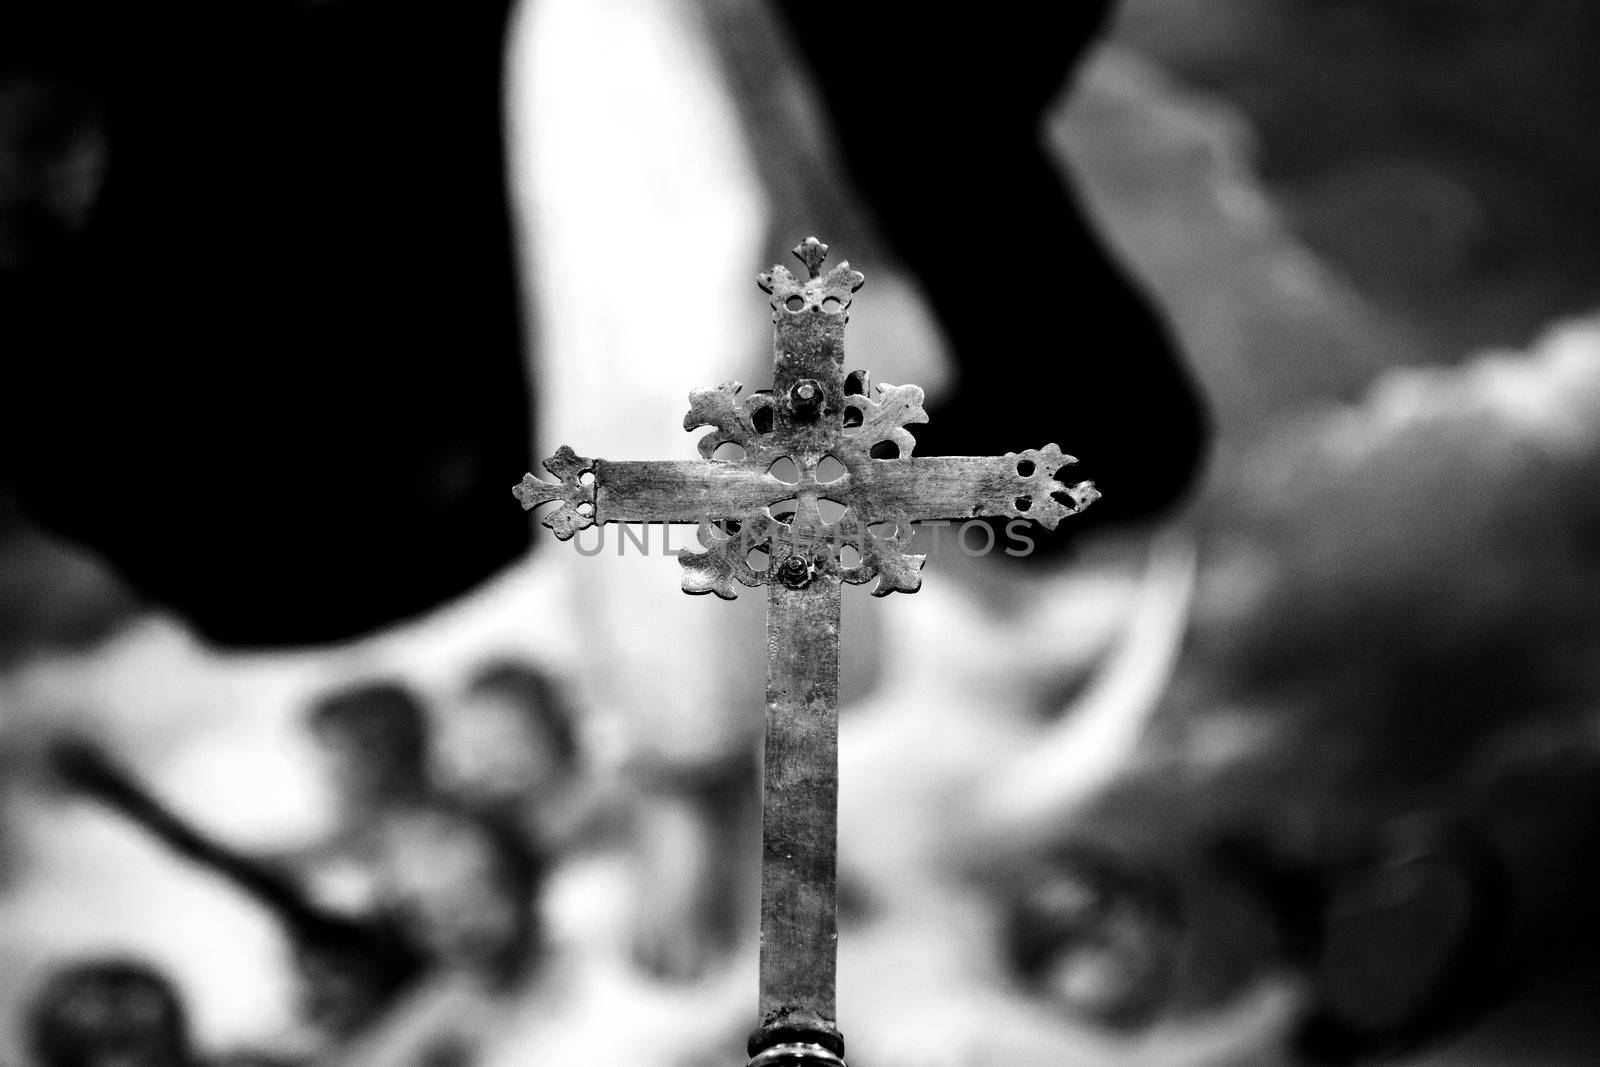 Christian cross in a church in black and white